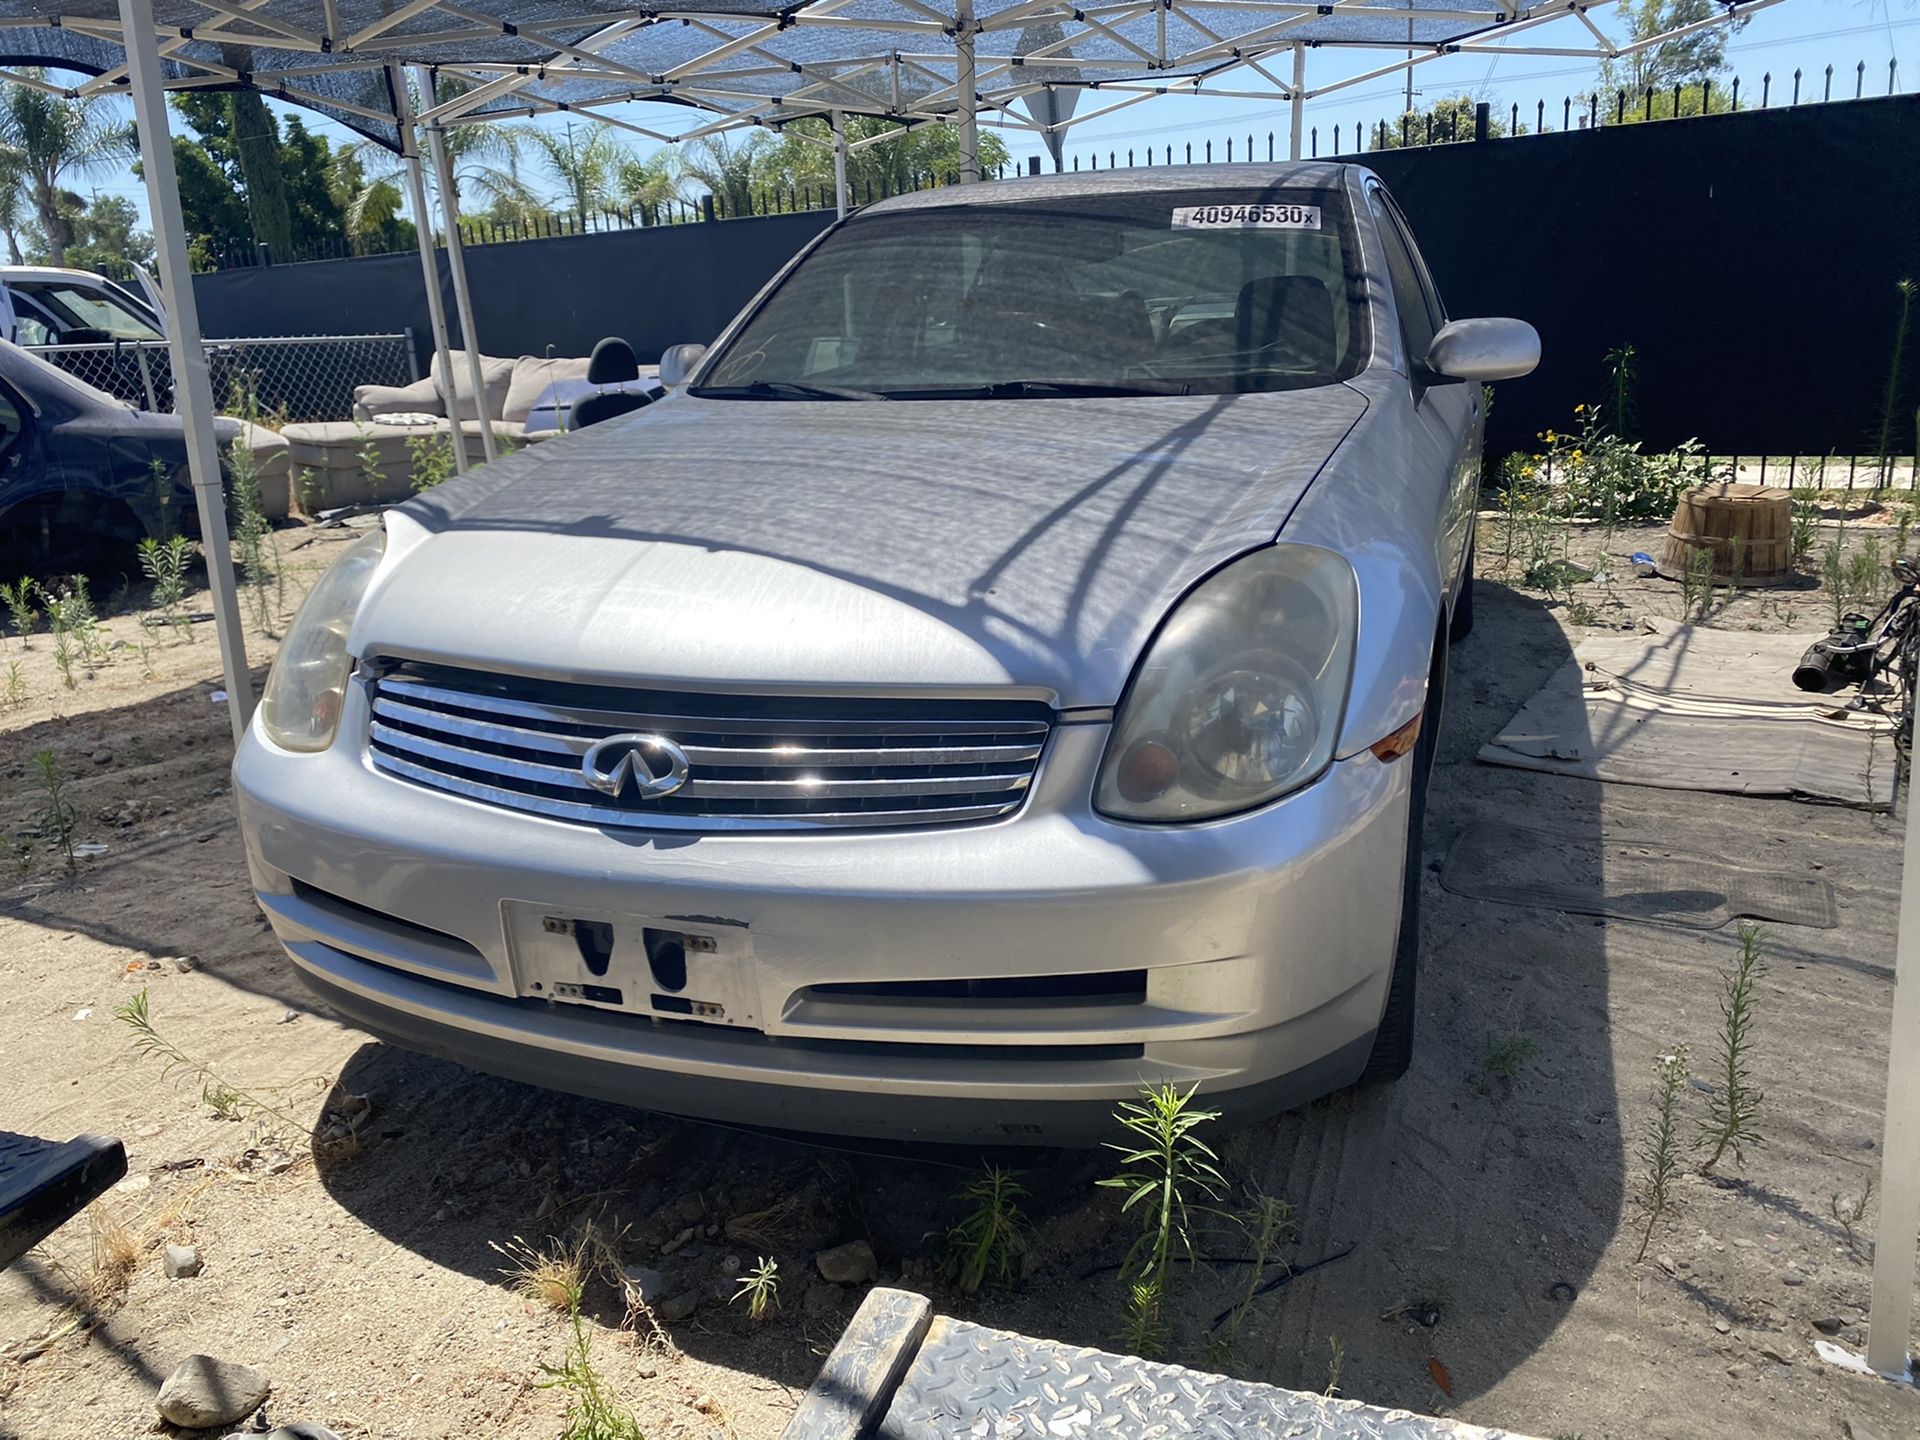 2003 infinity G35 for parts or whole car